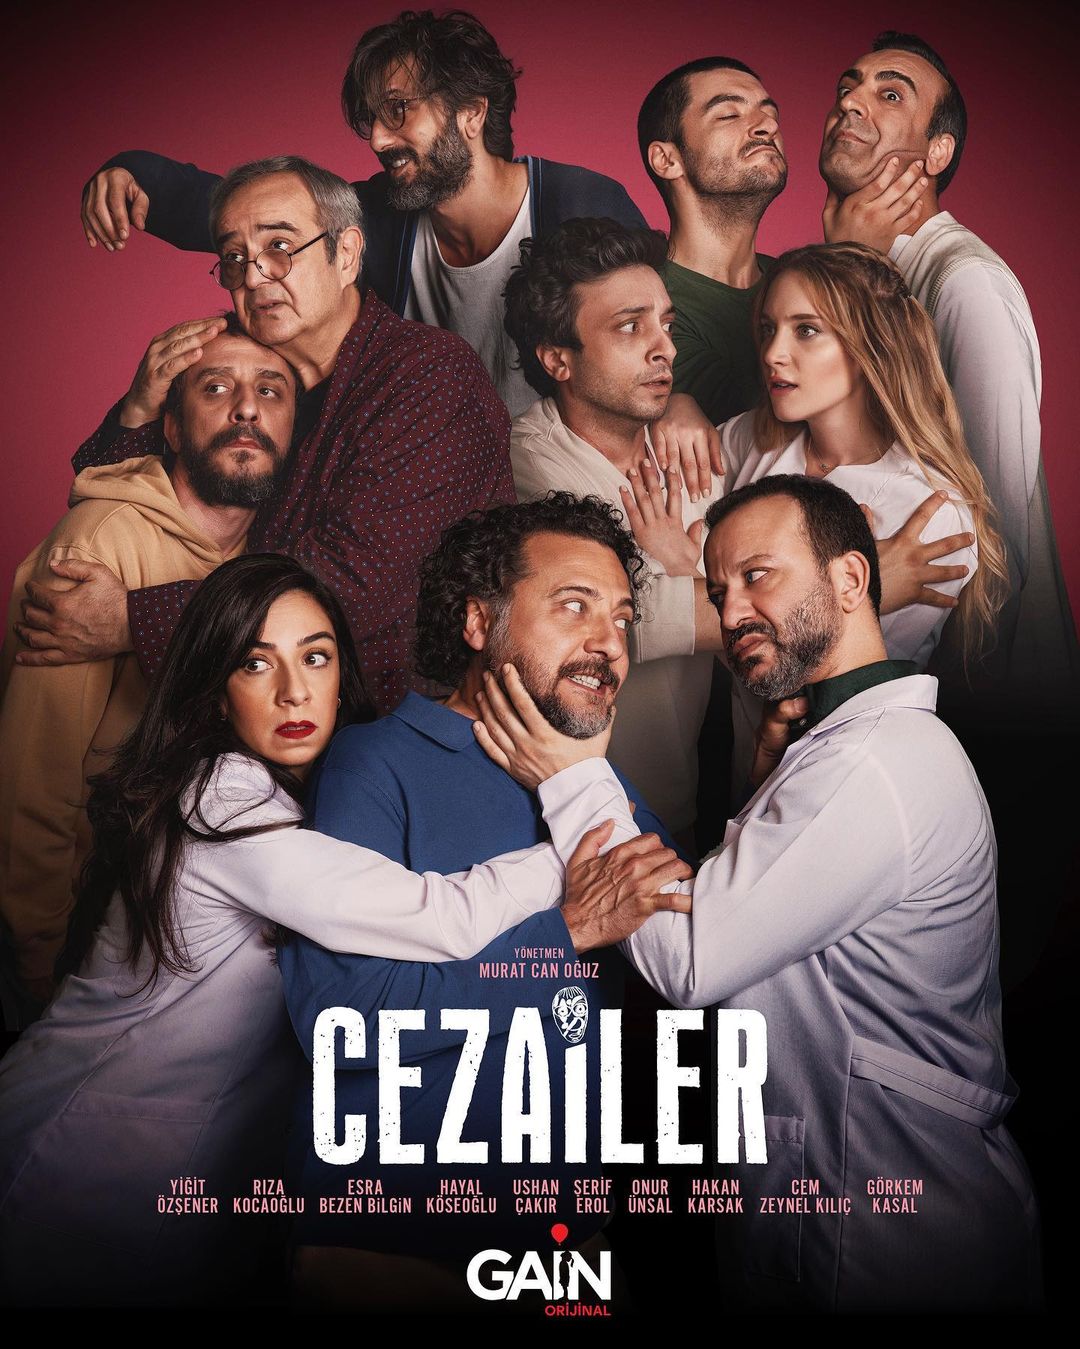 TV ratings for Cezailer in the United States. Gain TV series